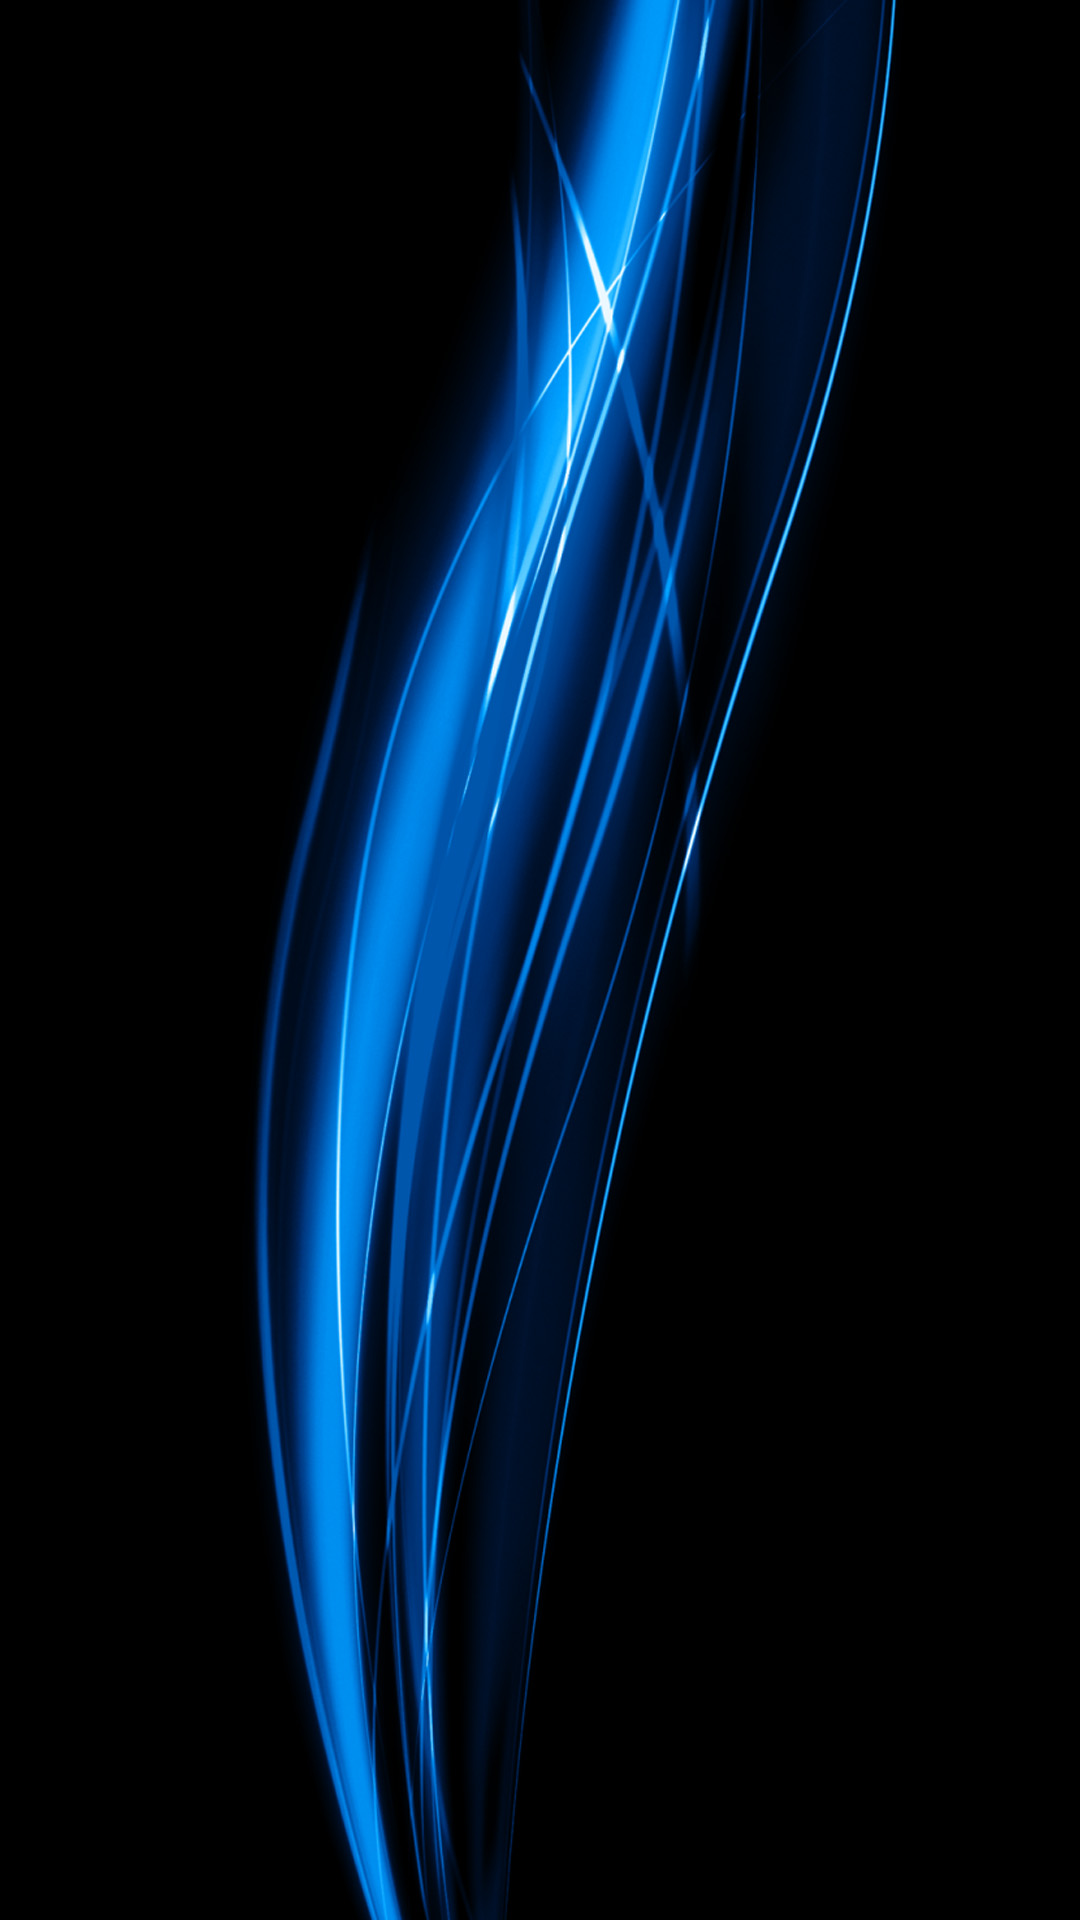 Abstract Blue Wave かっこいいiphone8壁紙 Iphone Wallpapers